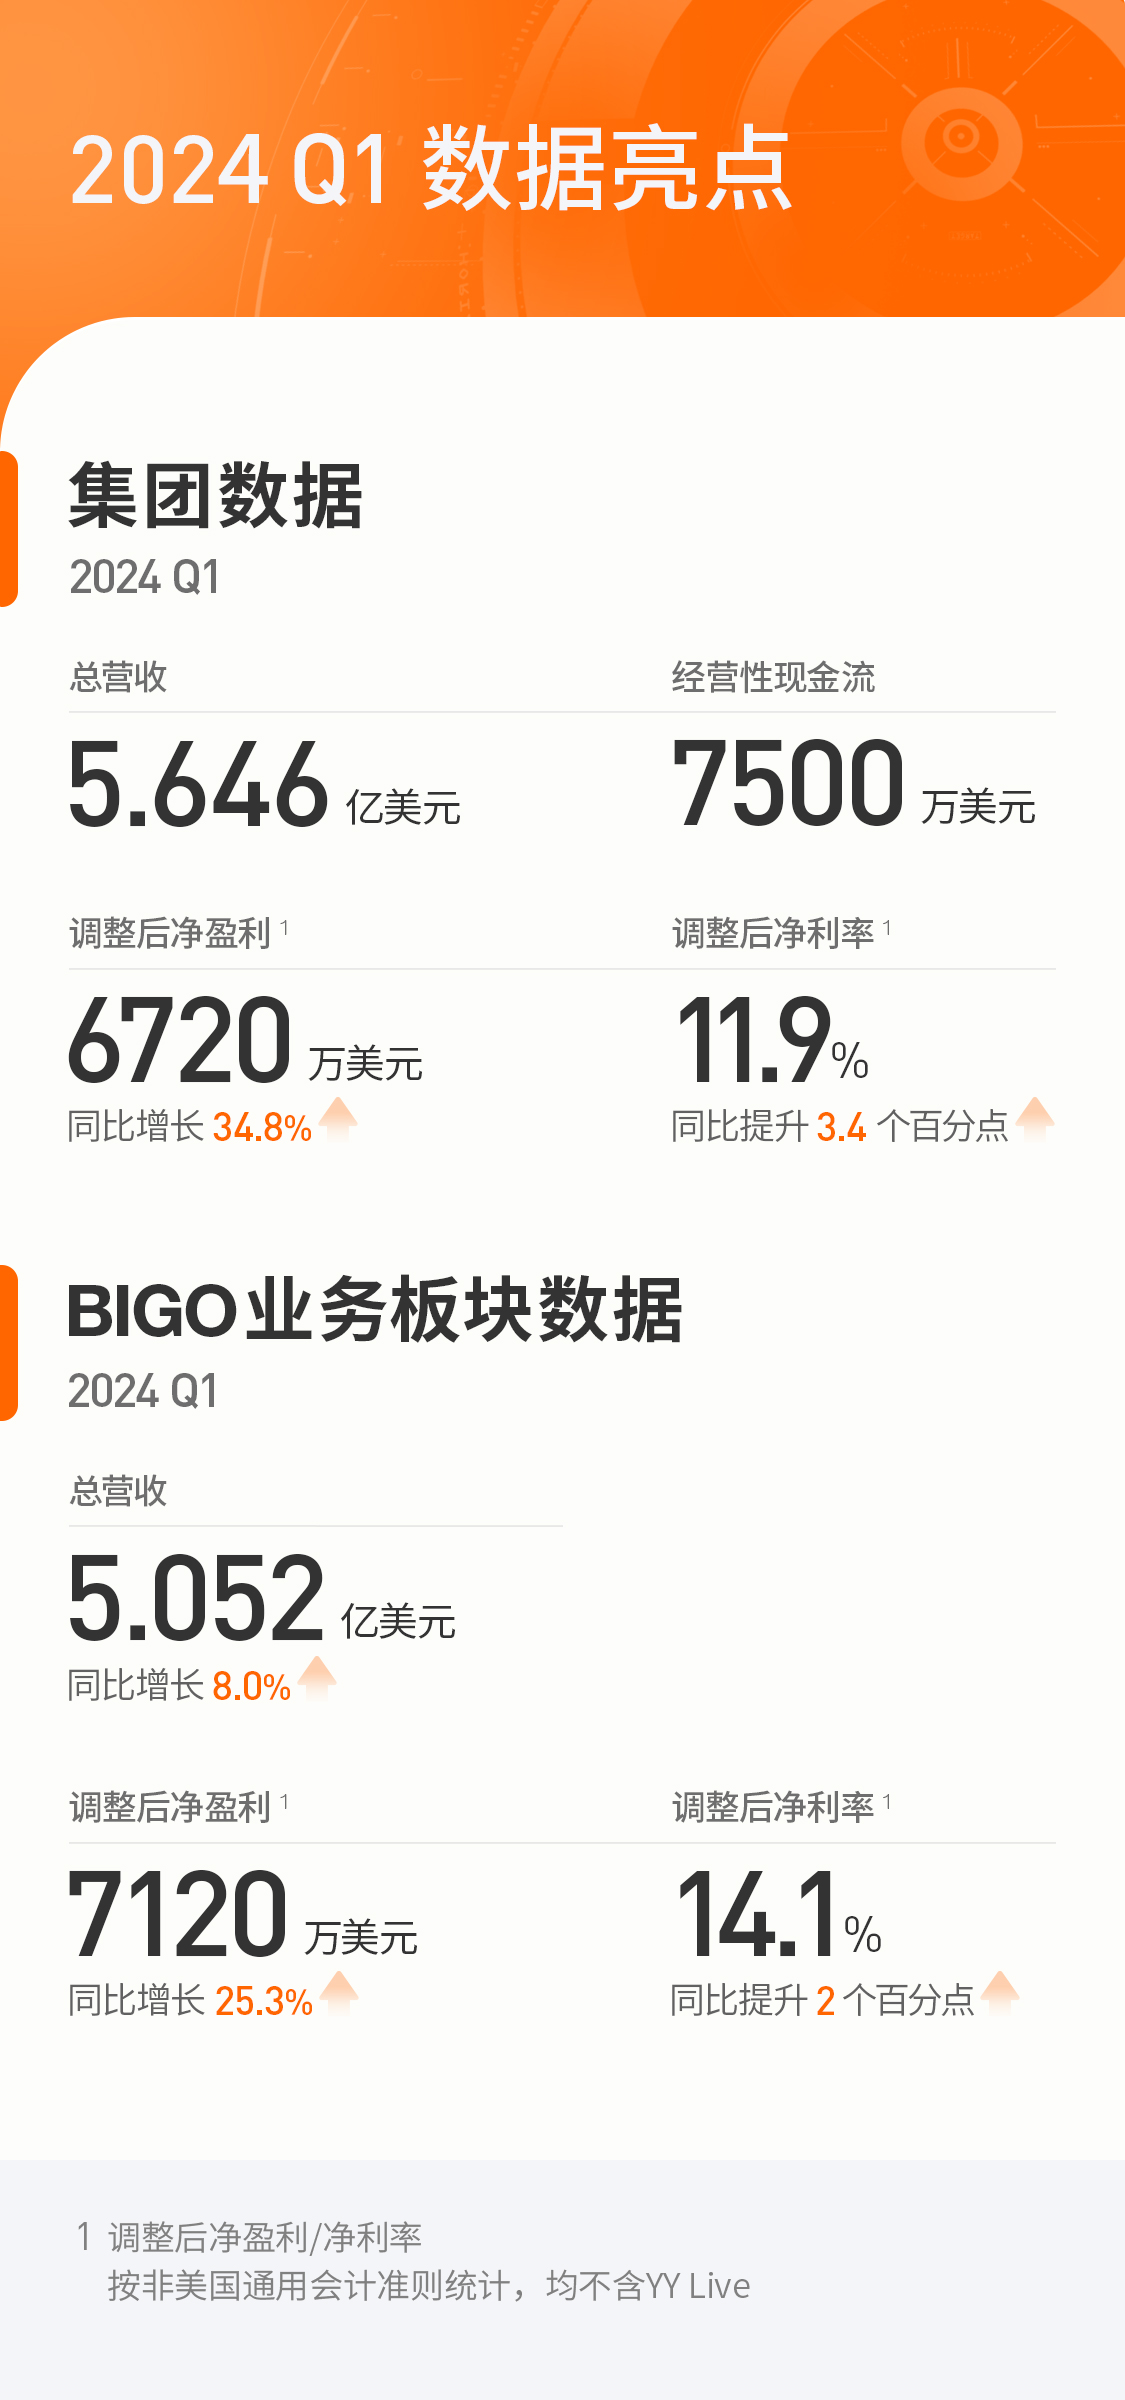  Huanju Group released its Q1 financial report in 2024: the group's net profit increased by 34.8% year on year, and BIGO's revenue continued to grow year on year